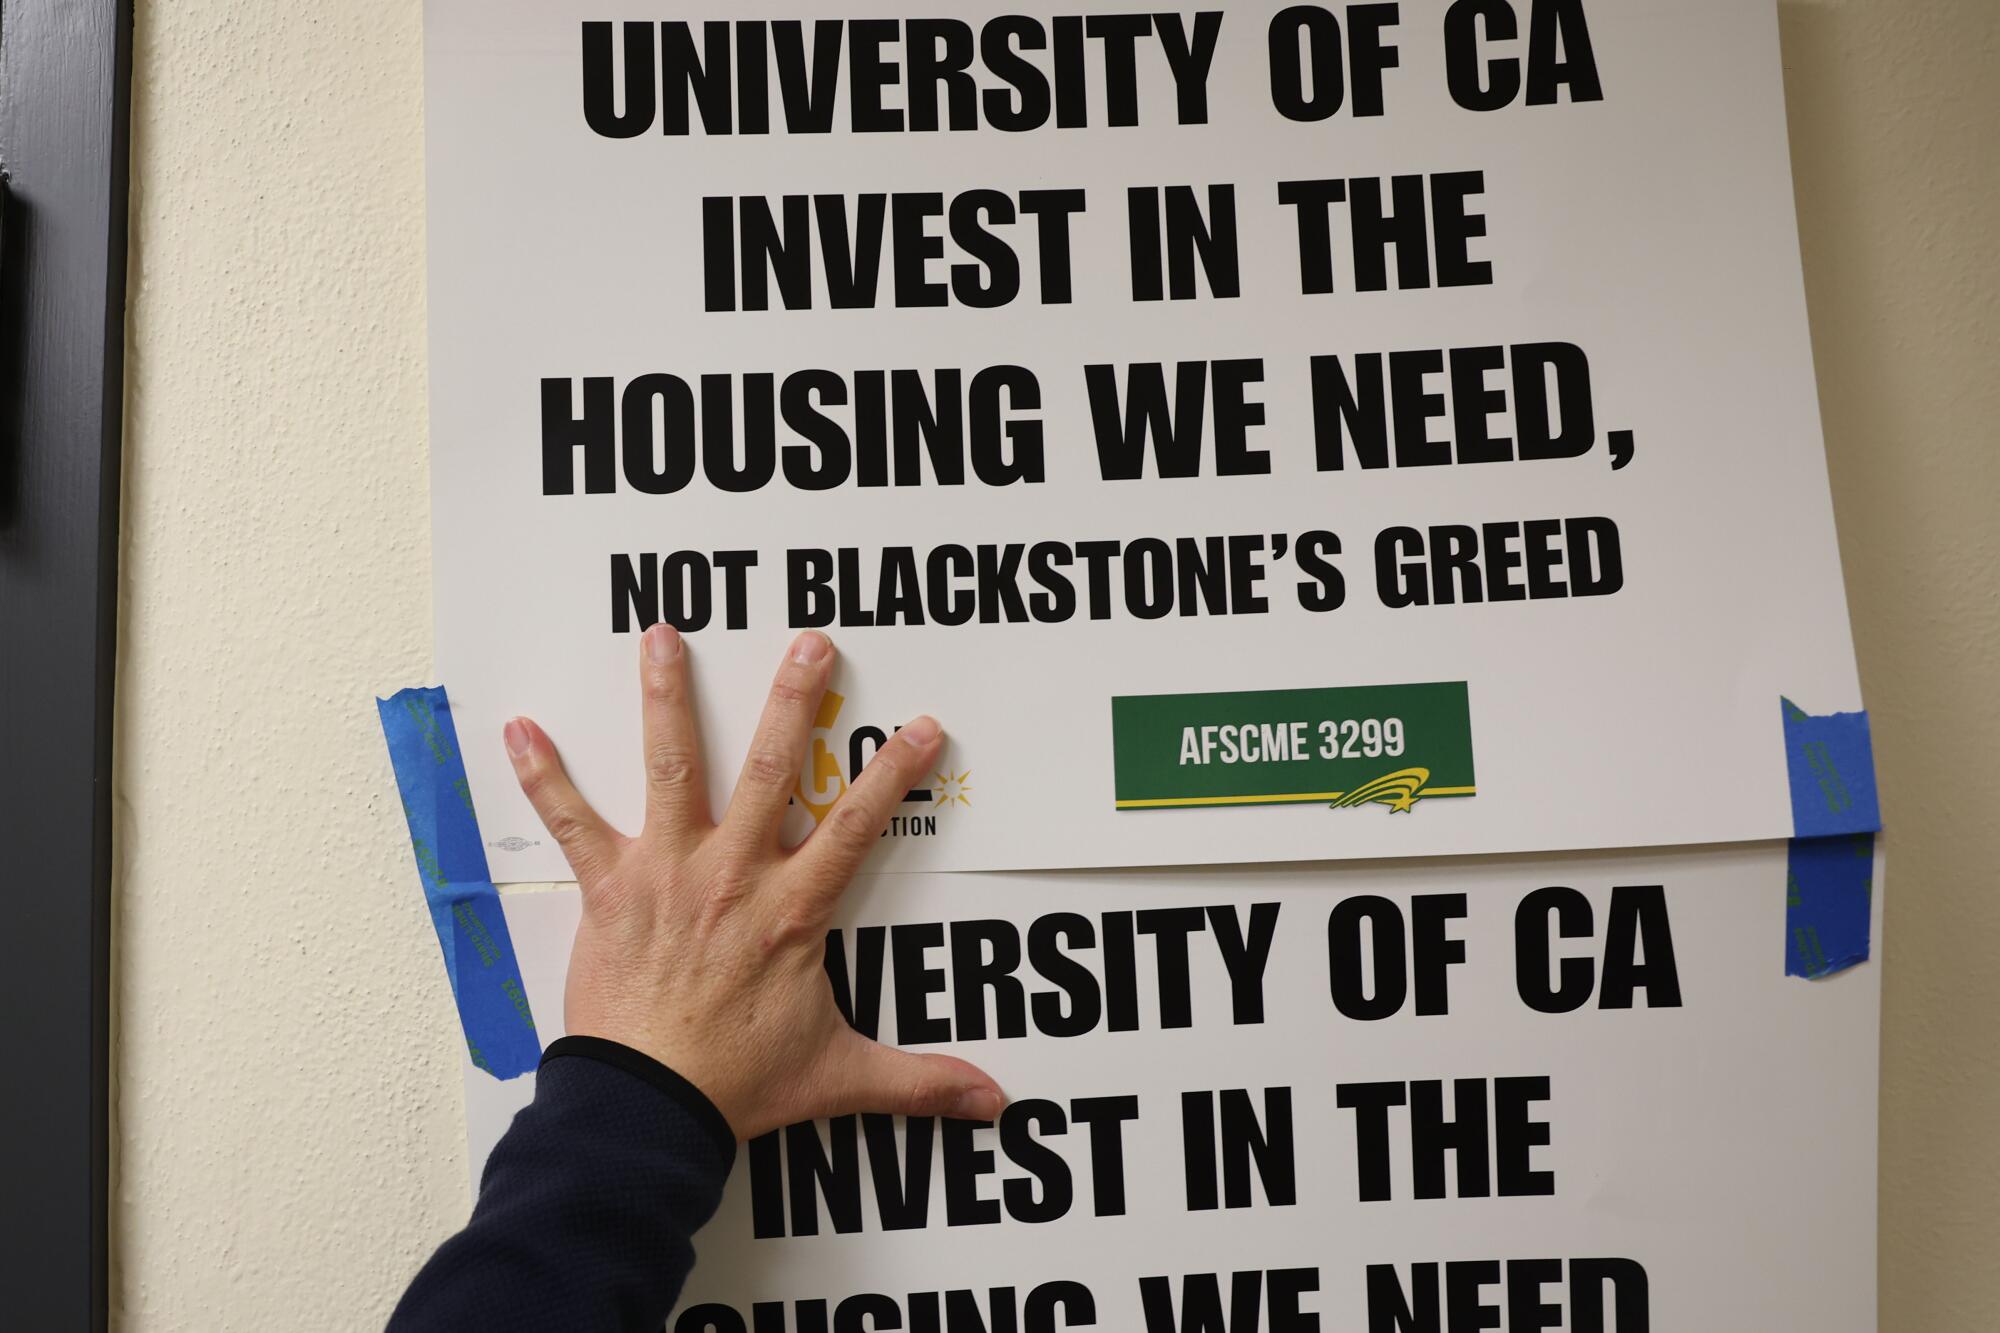 Signs reading "University of CA invest in the housing we need, not Blackstone's greed" are taped to a wall.